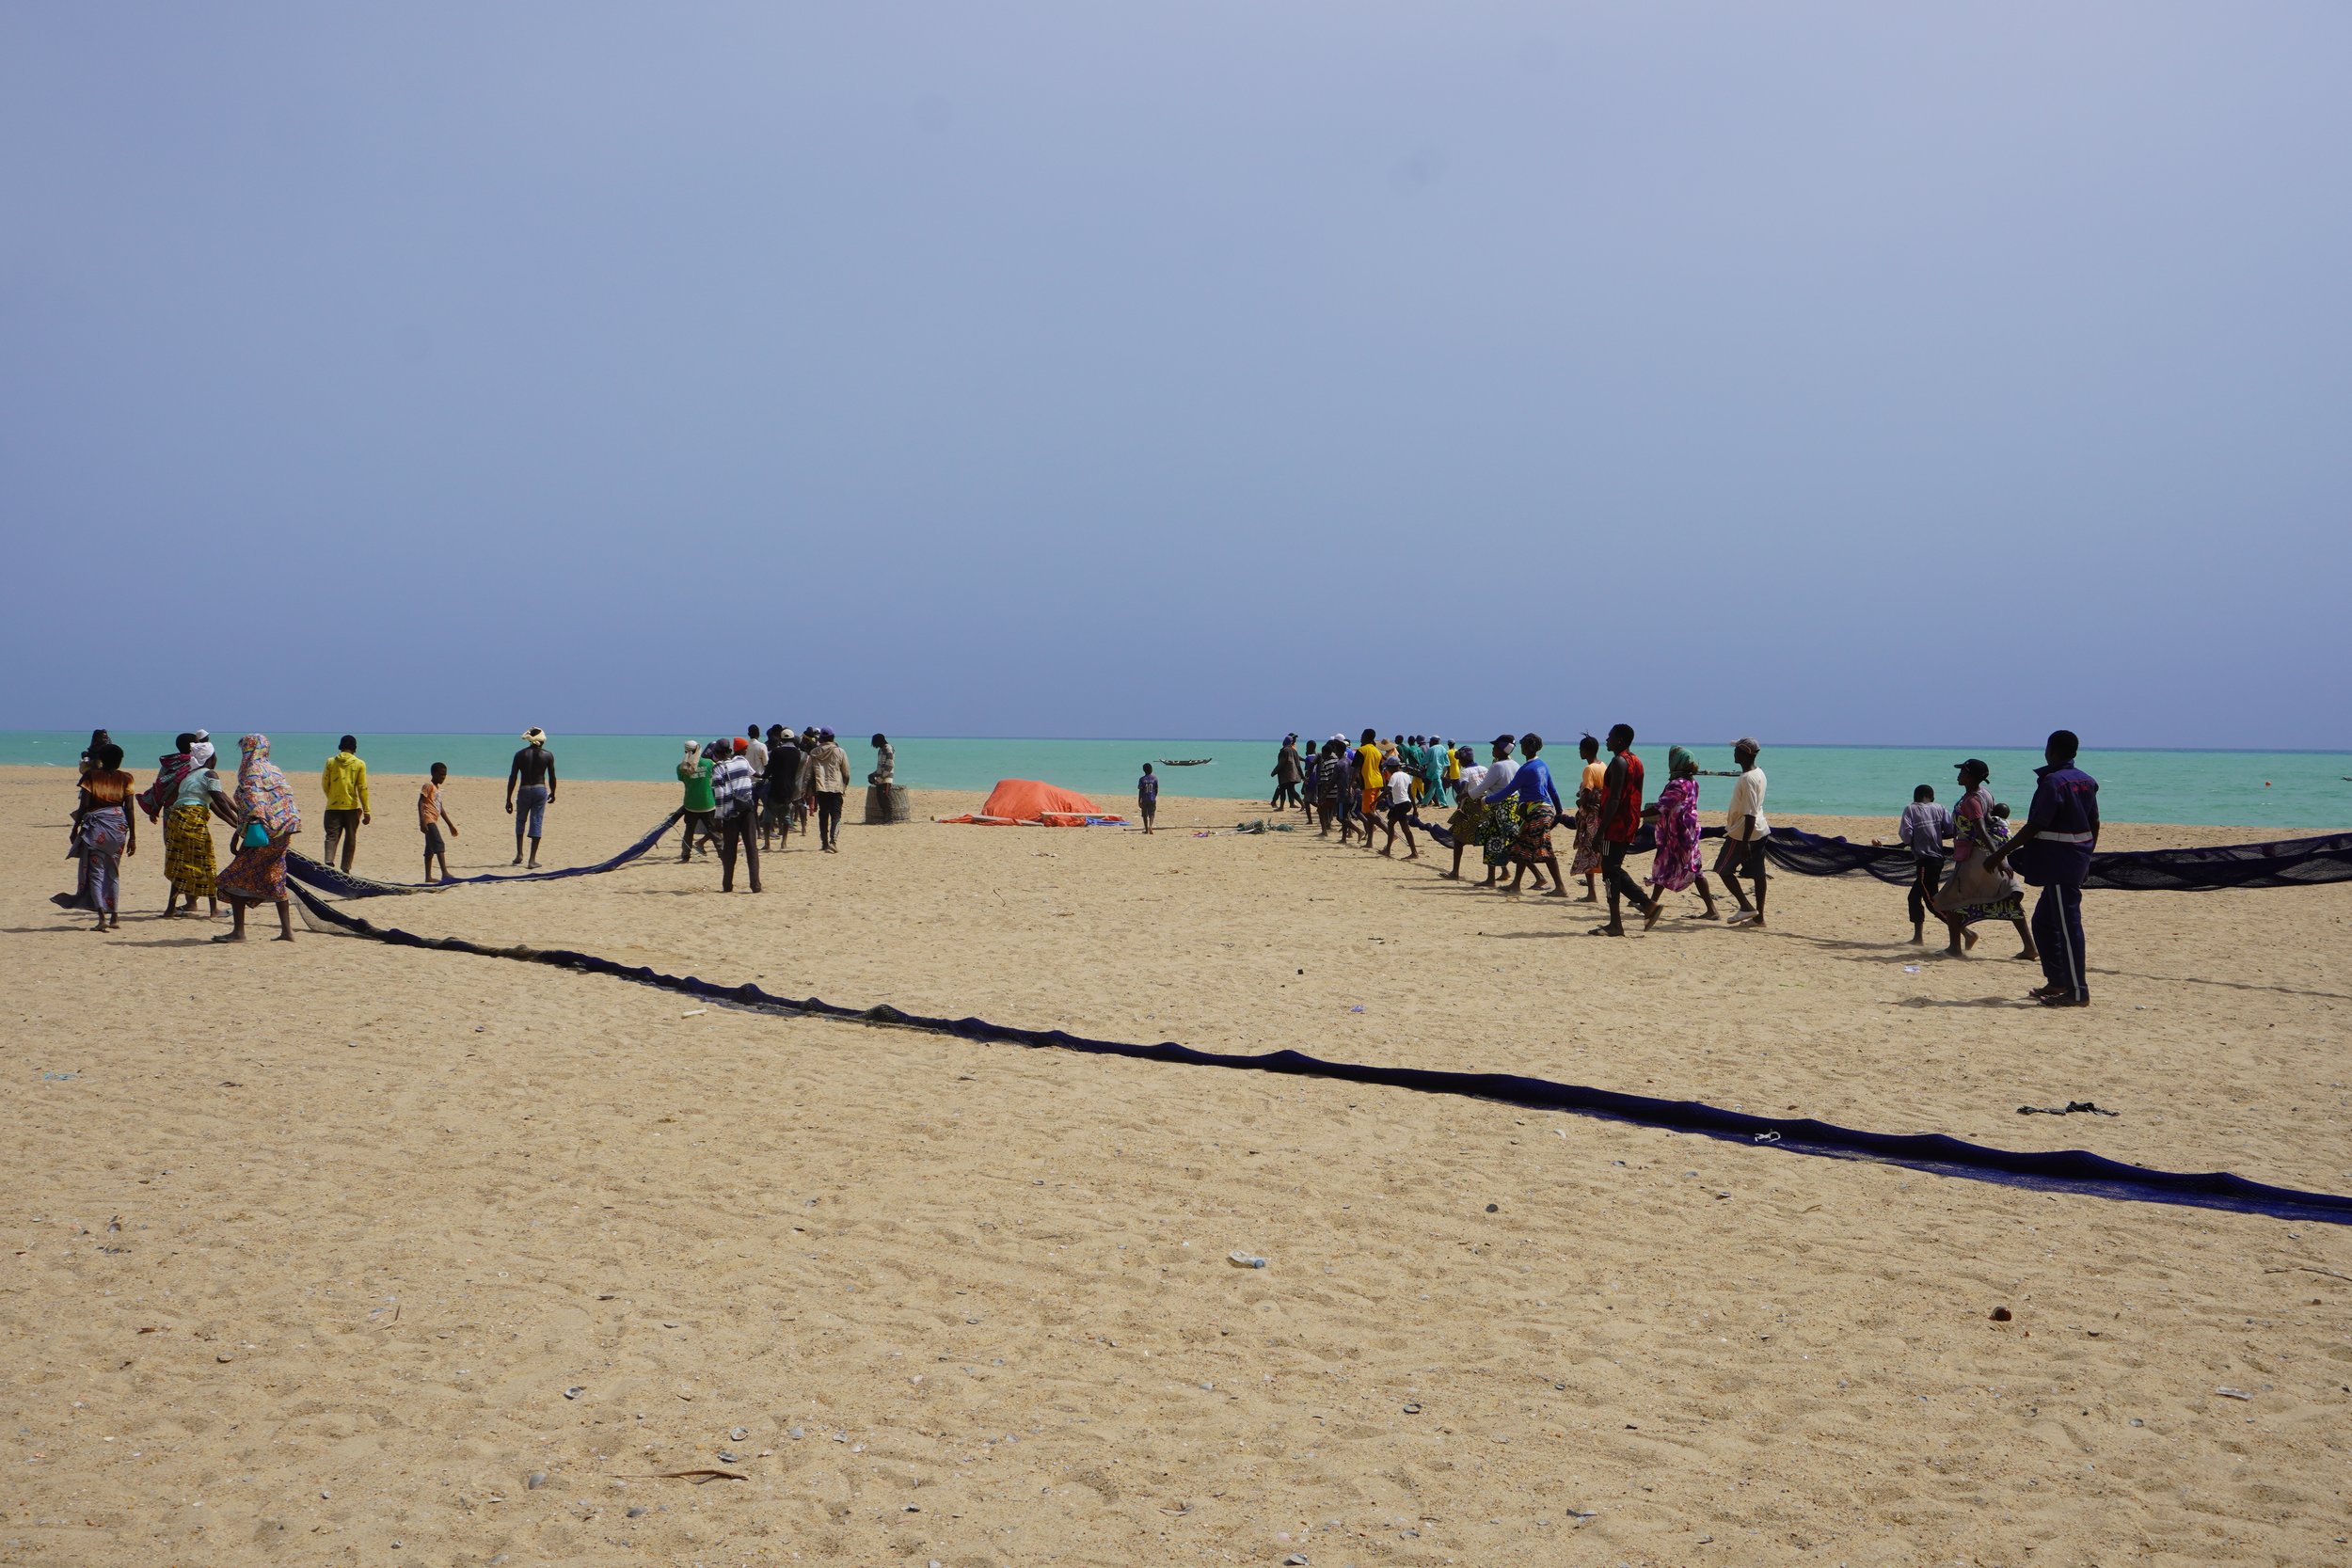  As the net is pulled towards the beach, the two lines move closer to each other. 